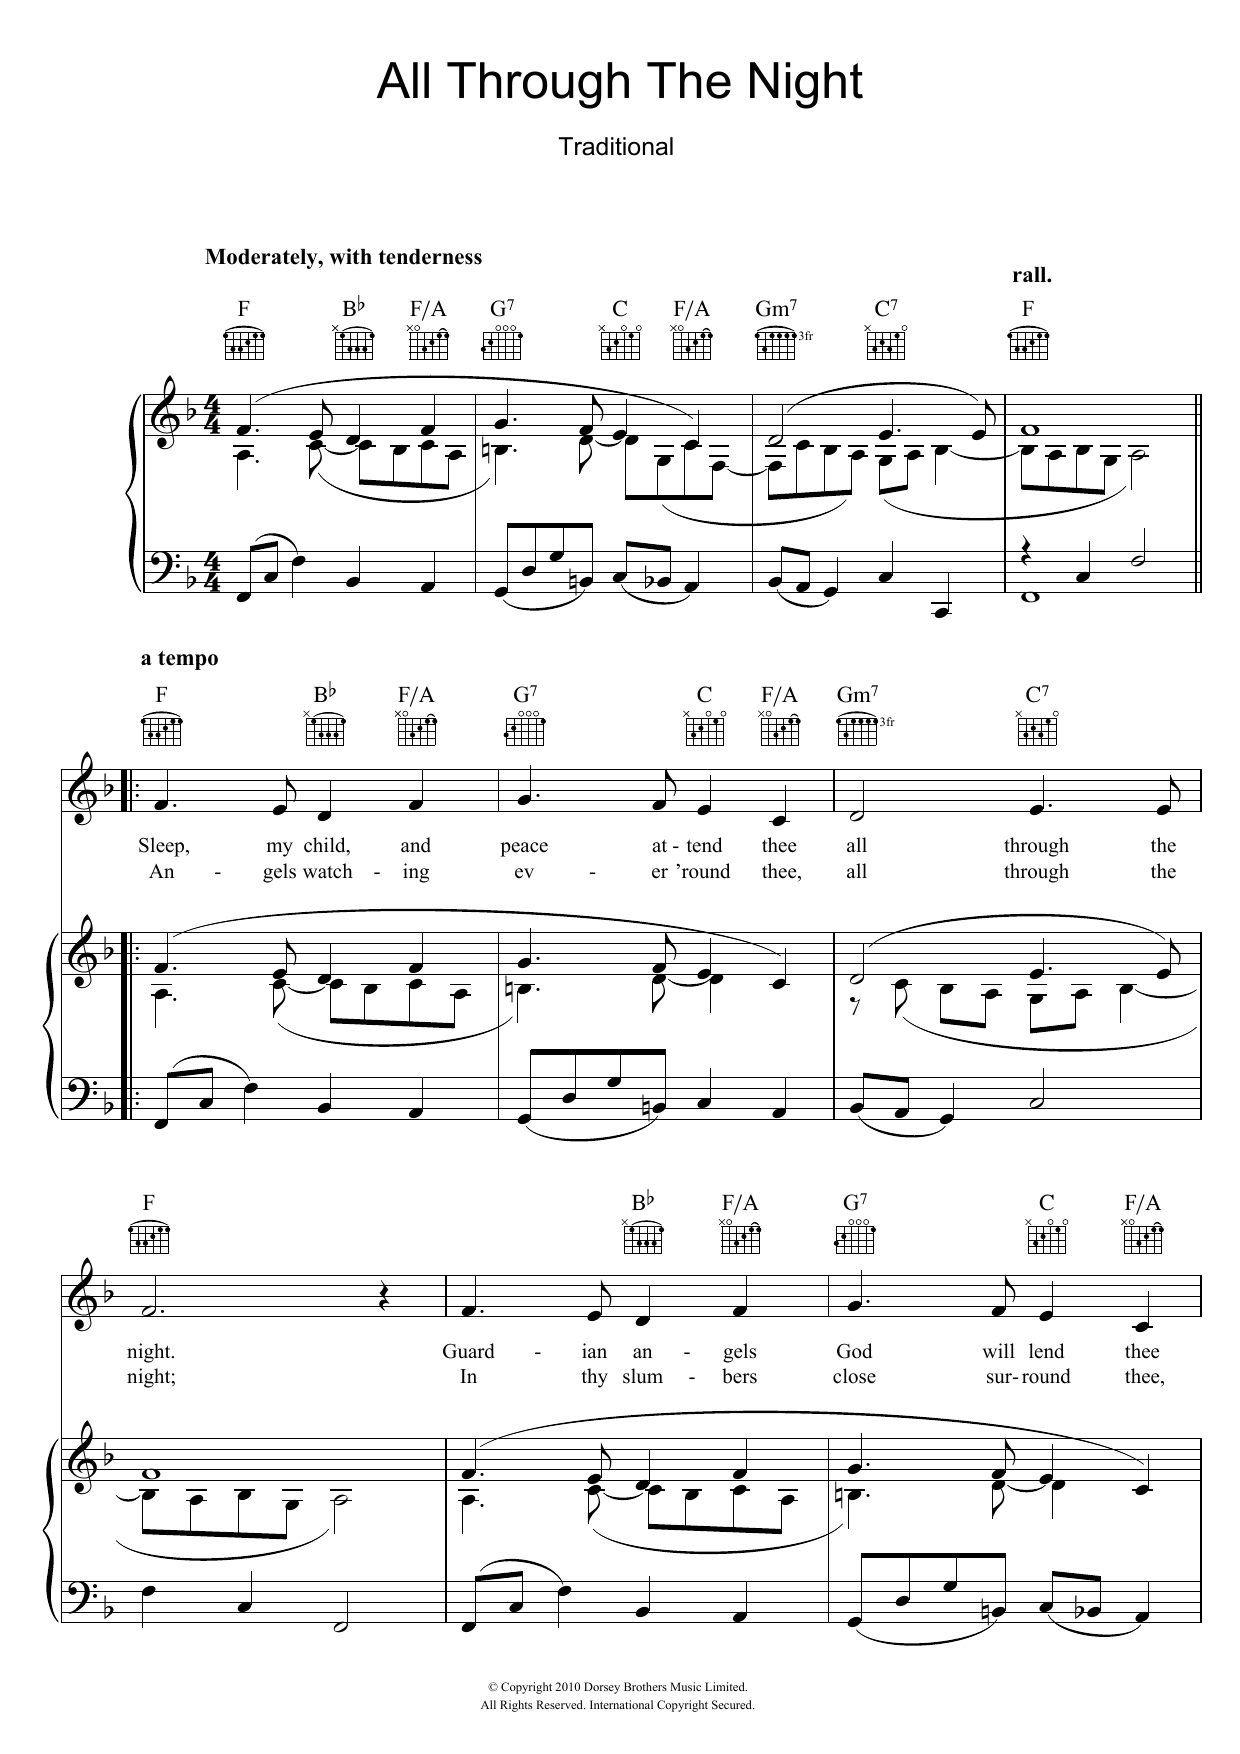 Download Traditional All Through The Night Sheet Music